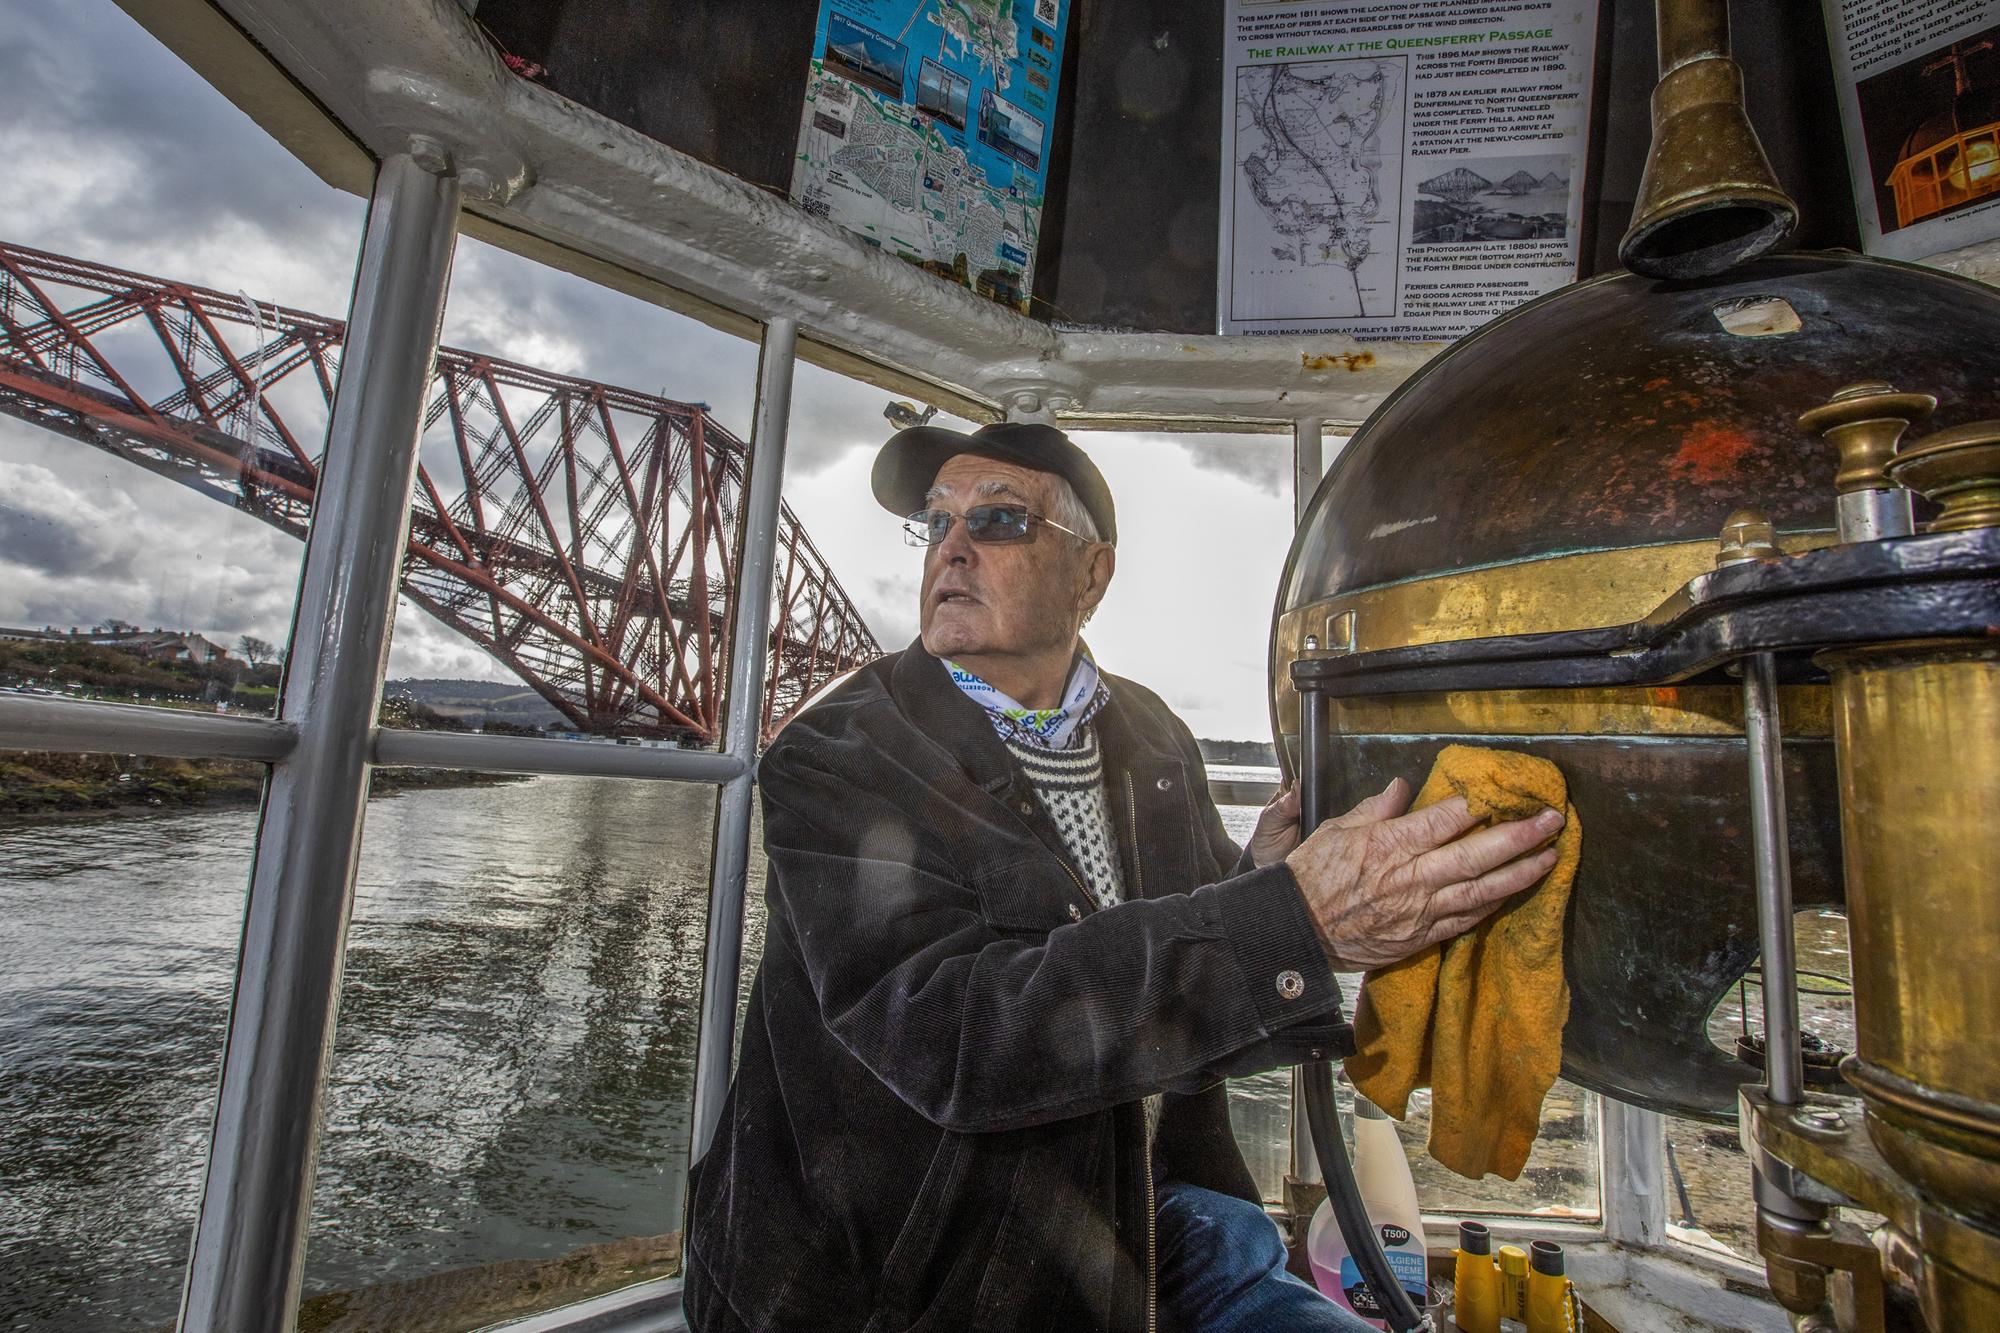 inside the world's smallest working 'lighthouse' in the forth which can shine for three miles and is powered by vegetable oil